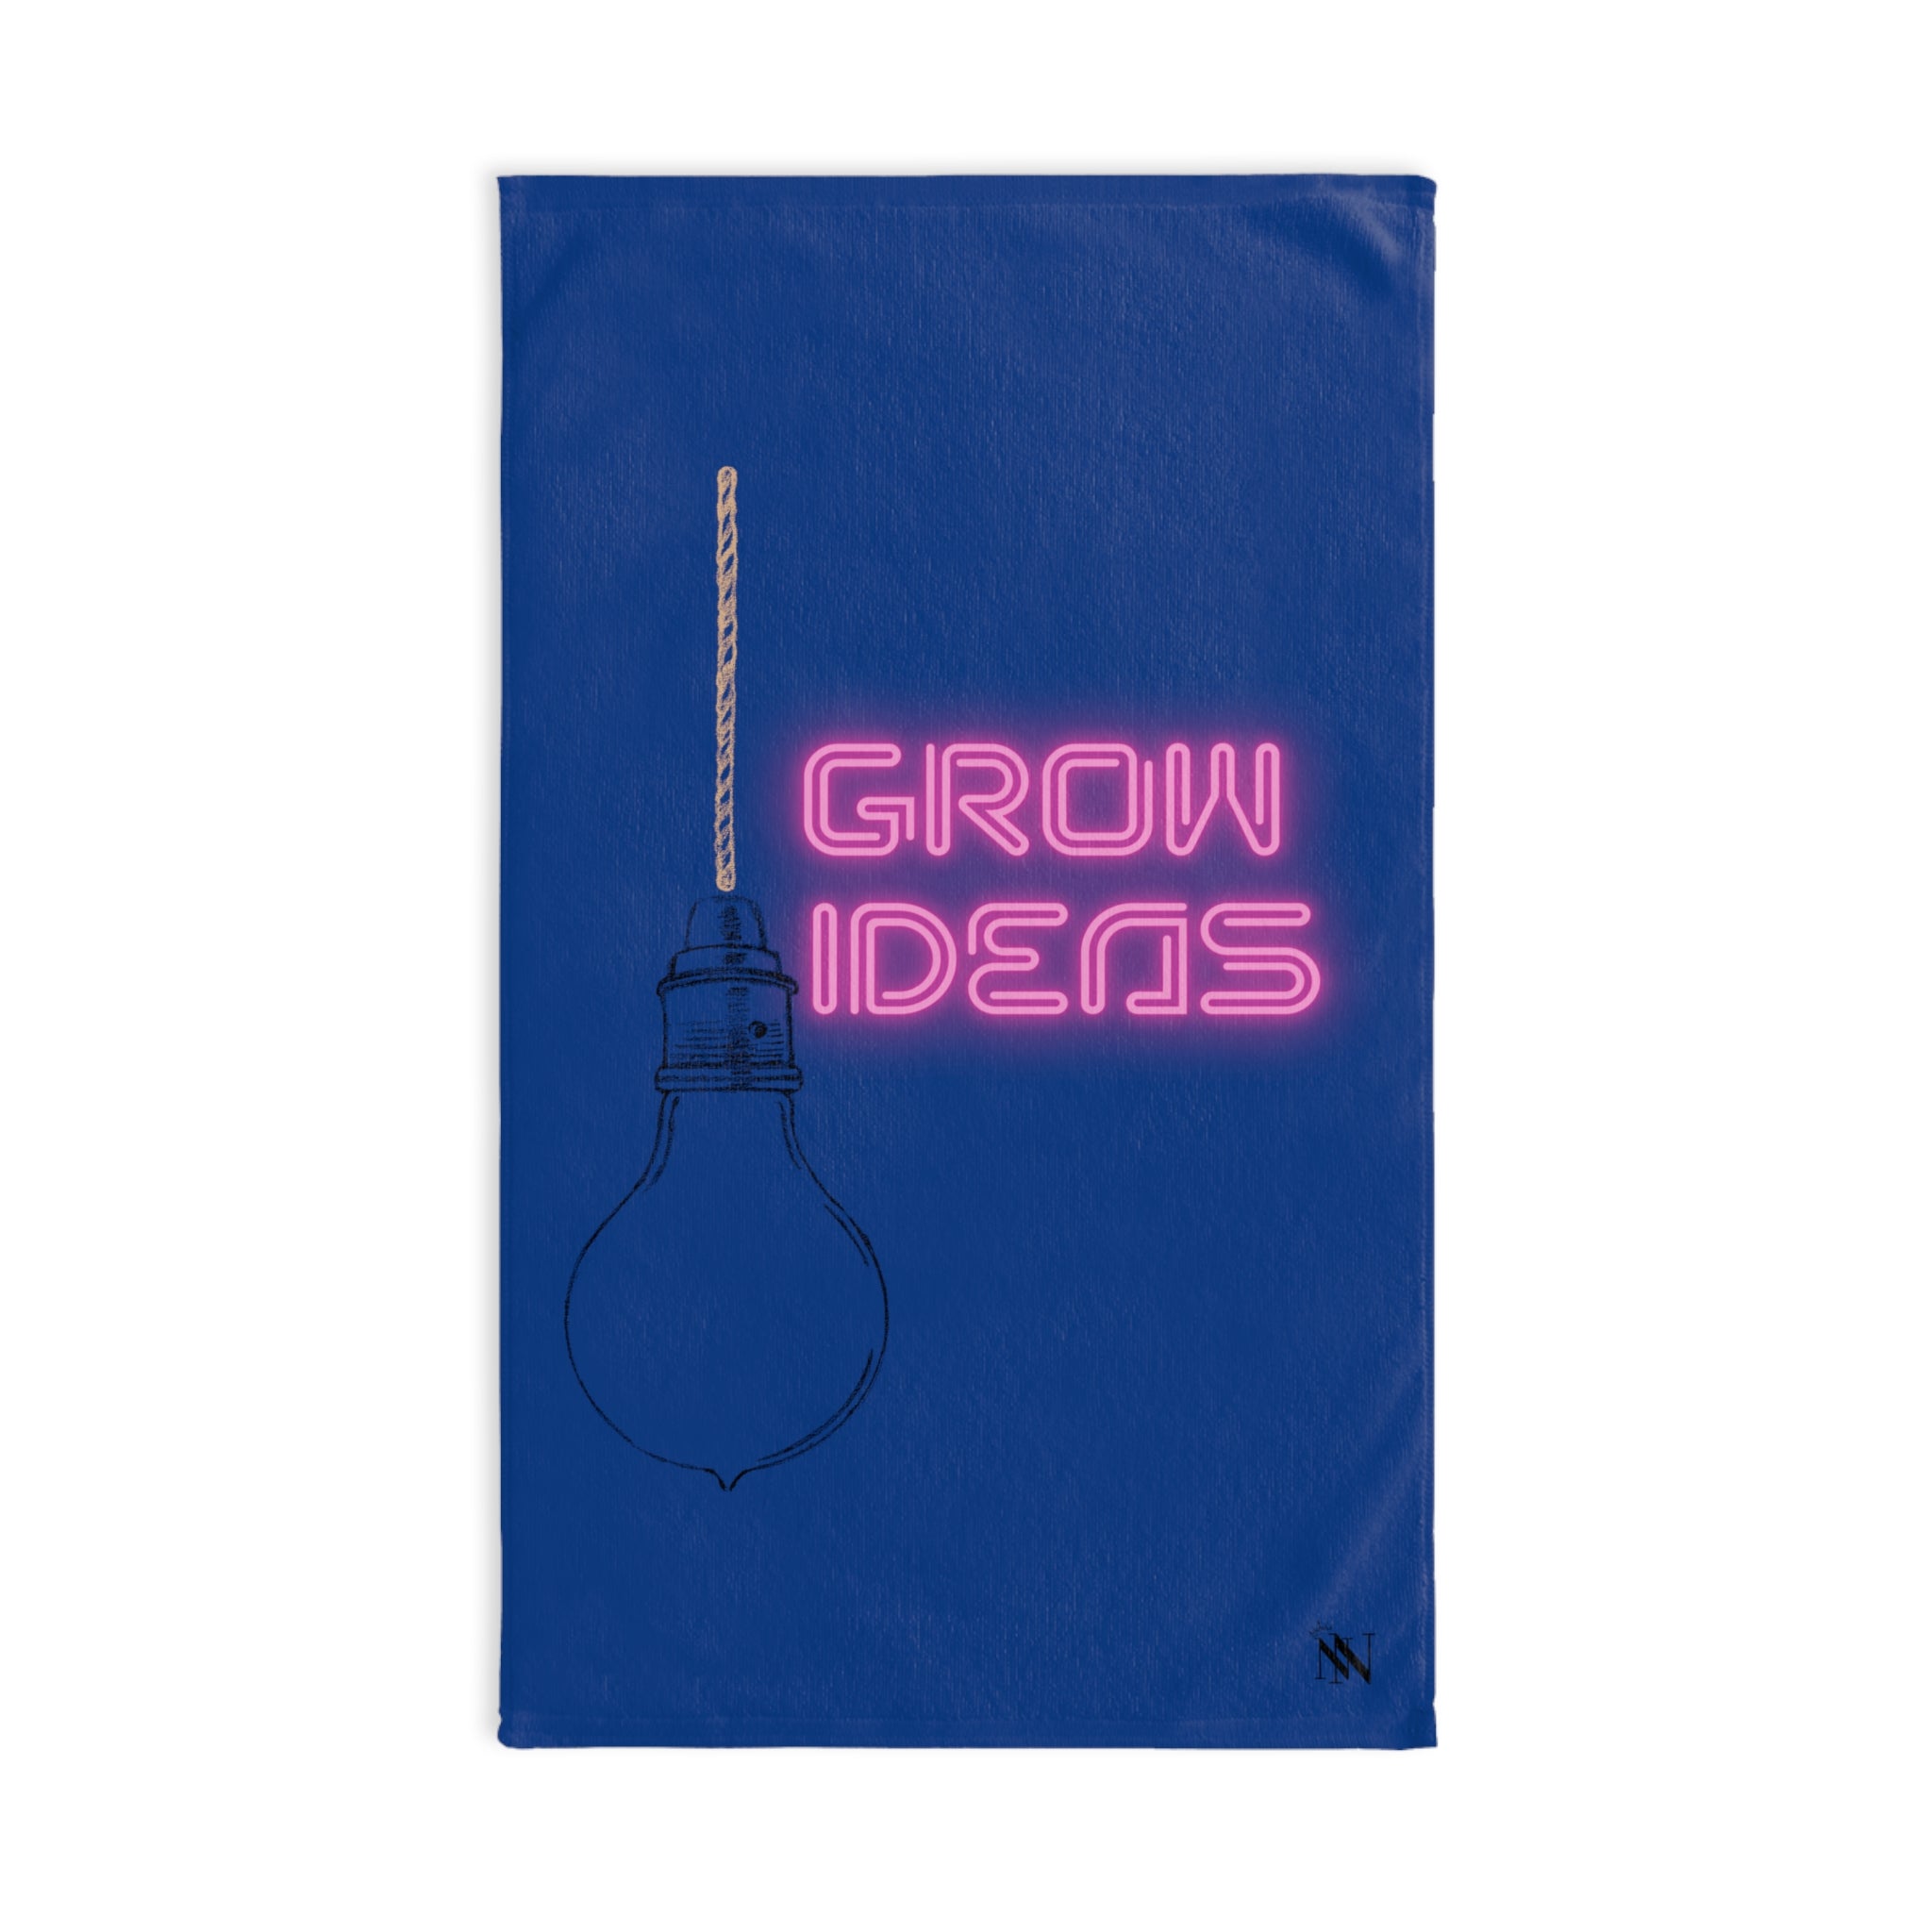 Grow Ideas Blue | Gifts for Boyfriend, Funny Towel Romantic Gift for Wedding Couple Fiance First Year Anniversary Valentines, Party Gag Gifts, Joke Humor Cloth for Husband Men BF NECTAR NAPKINS